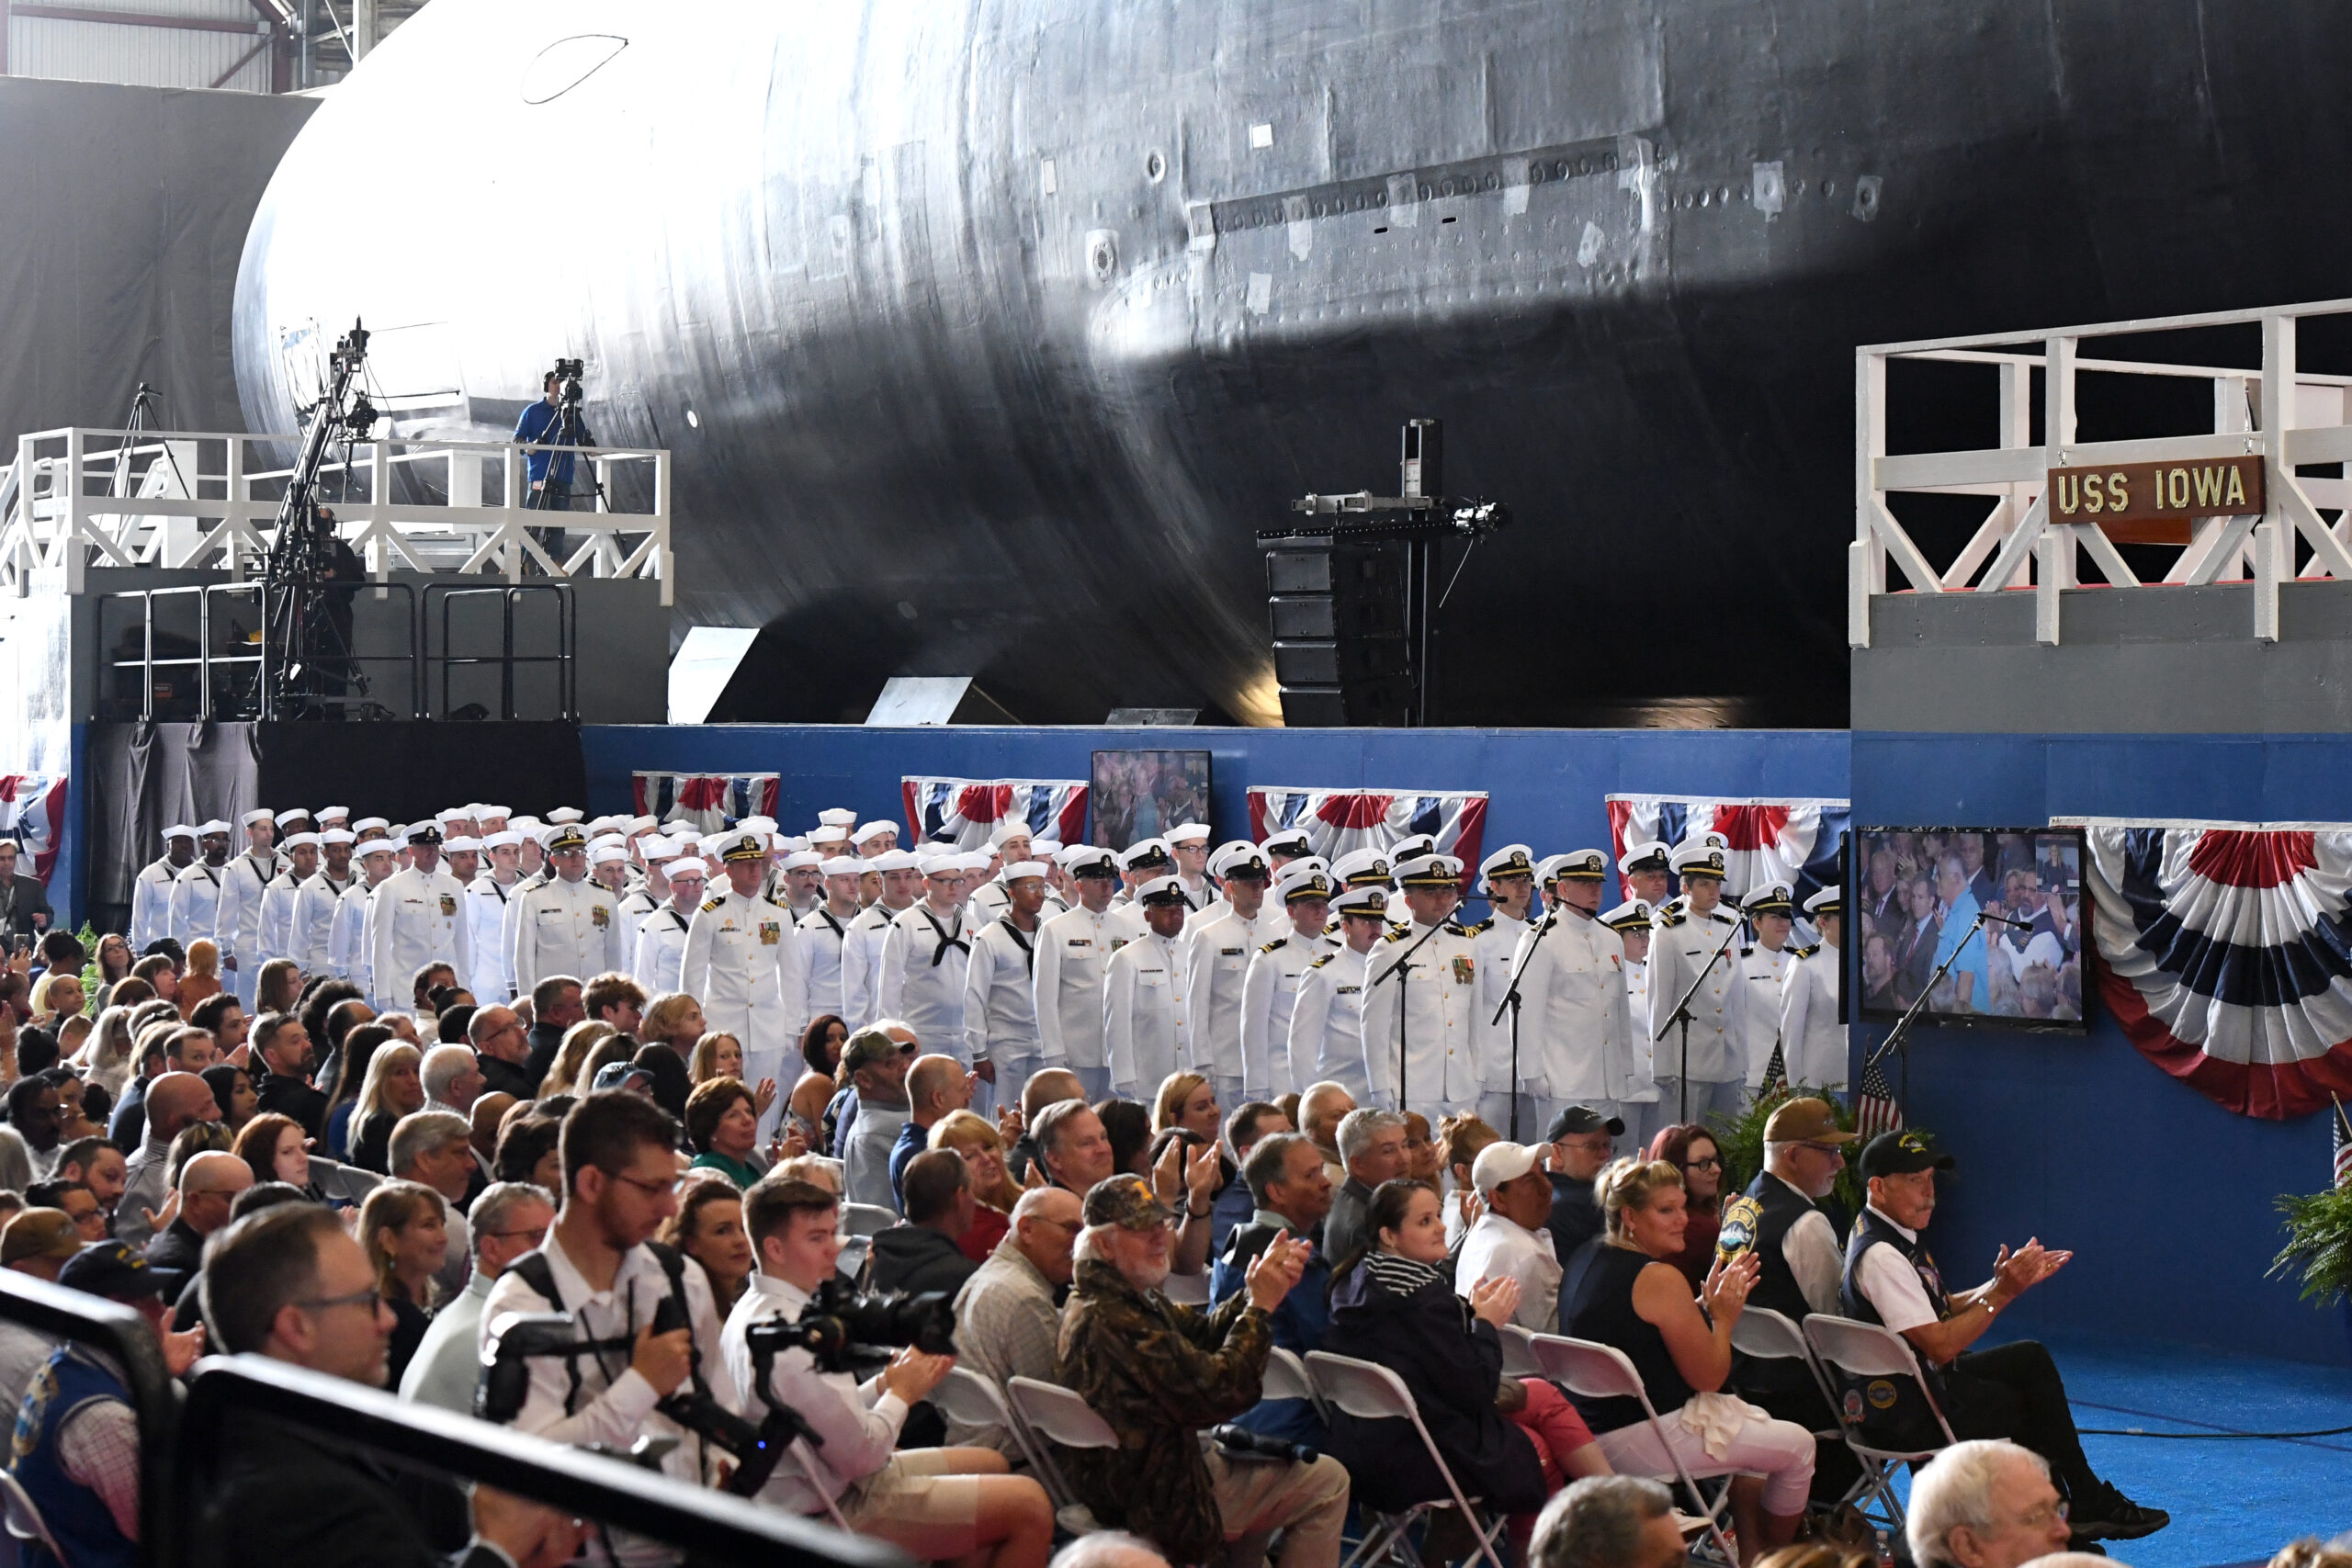 230617-N-UR986-0042 GROTON, Conn. (June 17, 2023) – The crew of the pre-commissioning unit (PCU) USS Iowa (SSN 897), stand in ranks next to their ship during a christening ceremony at General Dynamics Electric Boat shipyard facility in Groton, Conn., June 16, 2023. Iowa and crew will operate under Submarine Squadron (SUBRON) FOUR whose primary mission is to provide attack submarines that are ready, willing, and able to meet the unique challenges of undersea combat and deployed operations in unforgiving environments across the globe. (U.S. Navy photo by Petty Officer 2nd Class Wesley Towner)